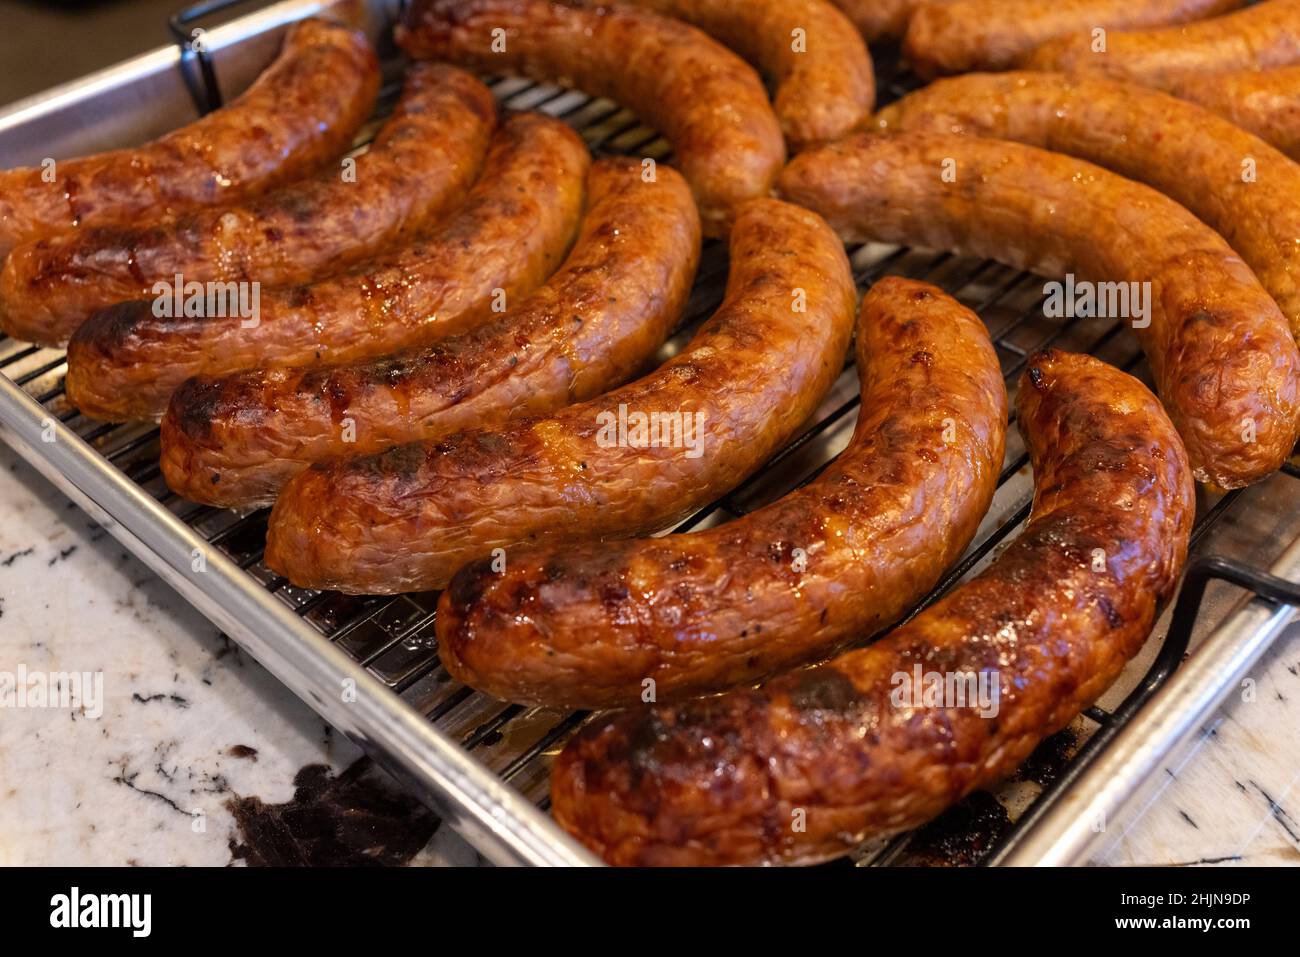 delicious cooked grilled sausage food close up shot Stock Photo